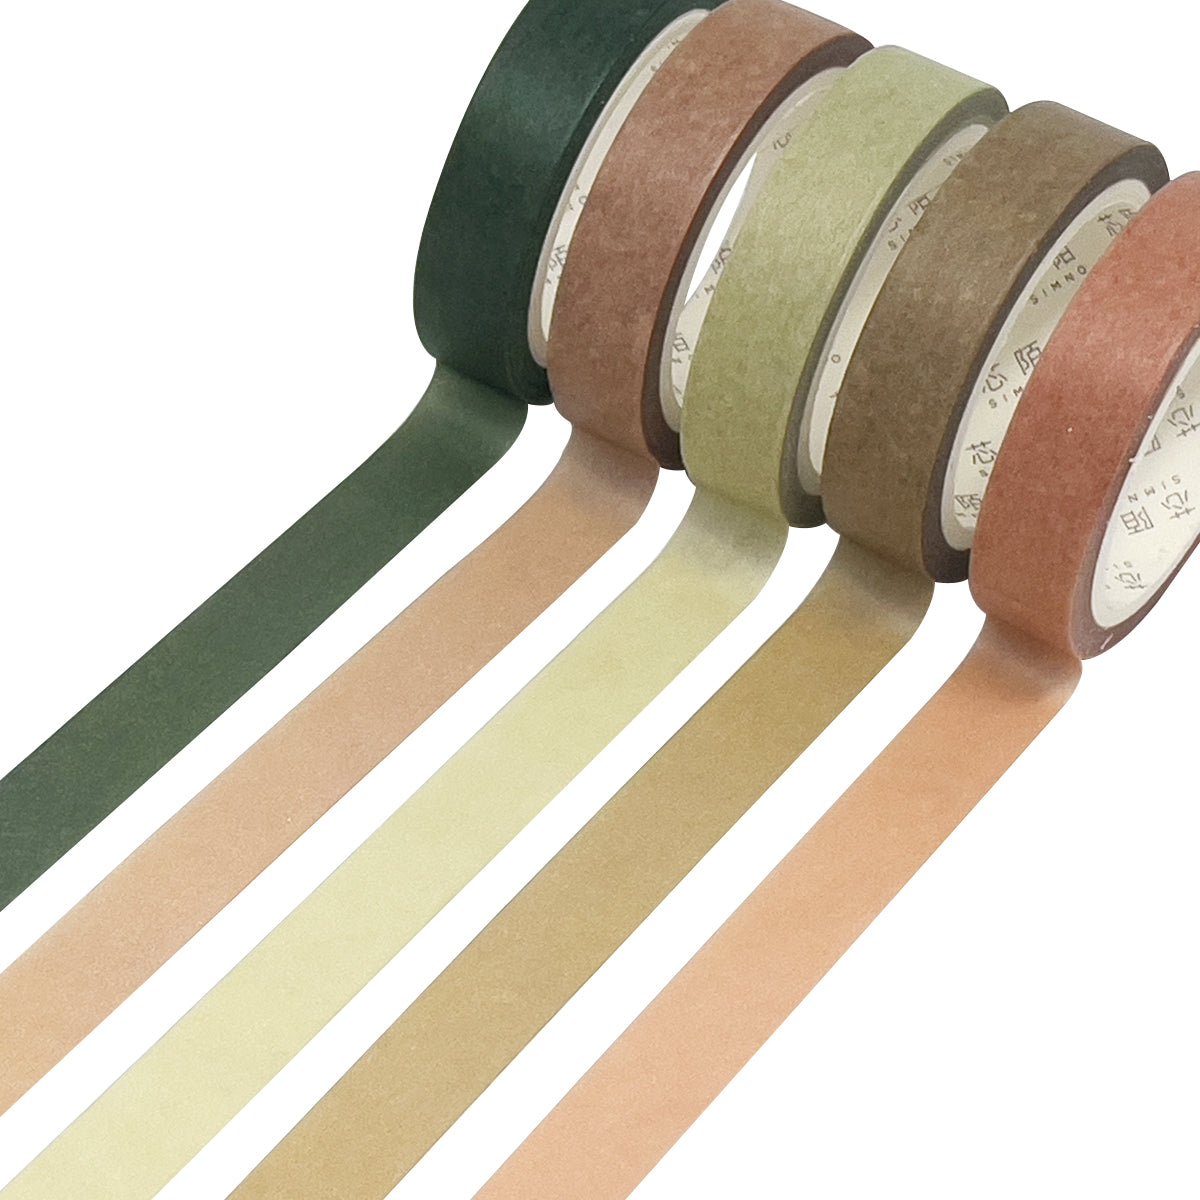 Wrapables Solid Color Washi Tape (Set of 5)